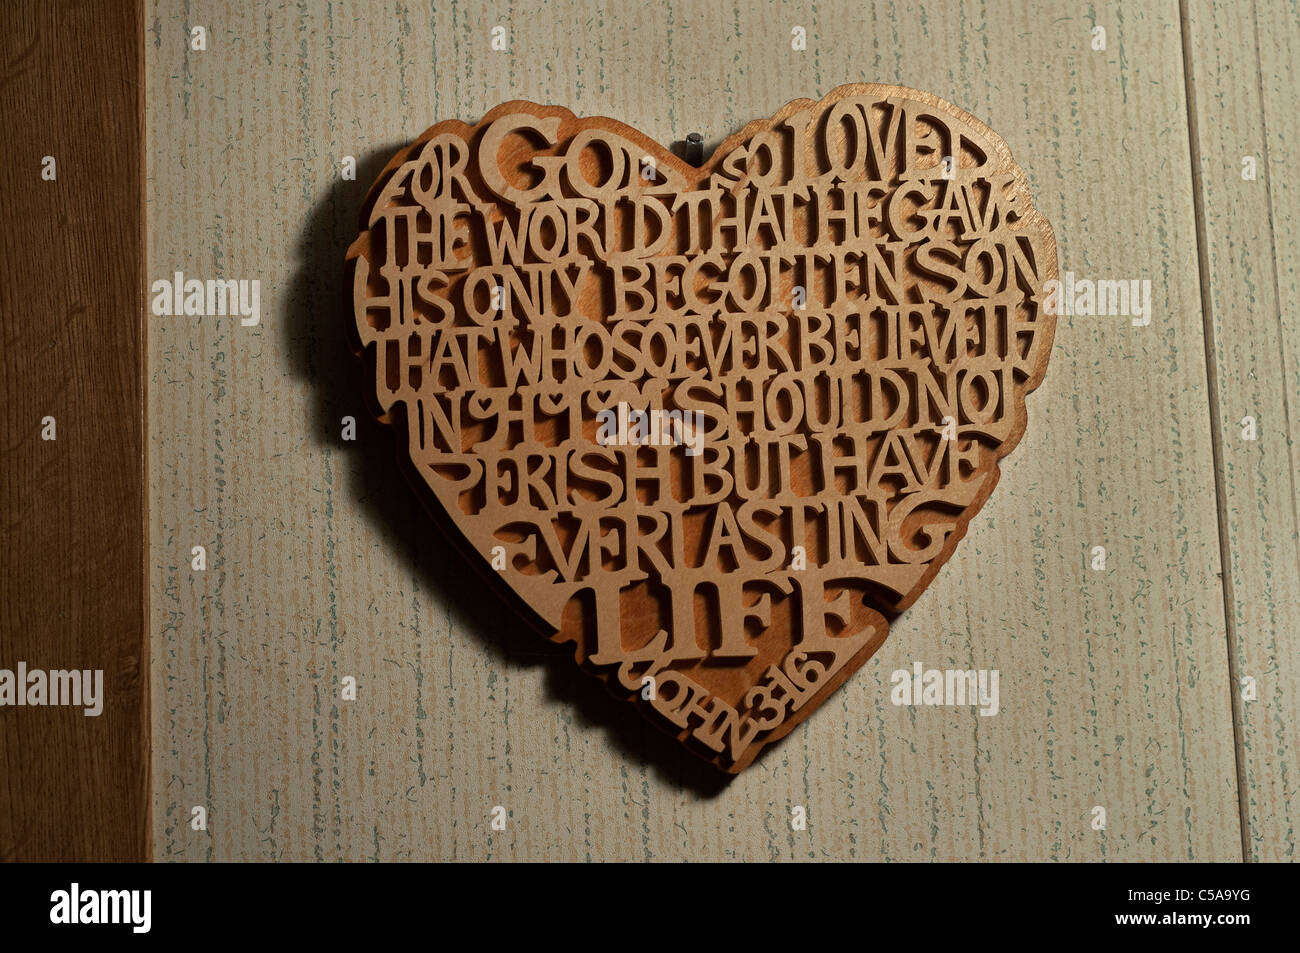 John 3 16 new testament Bible verse carved into a wall plaque Stock Photo